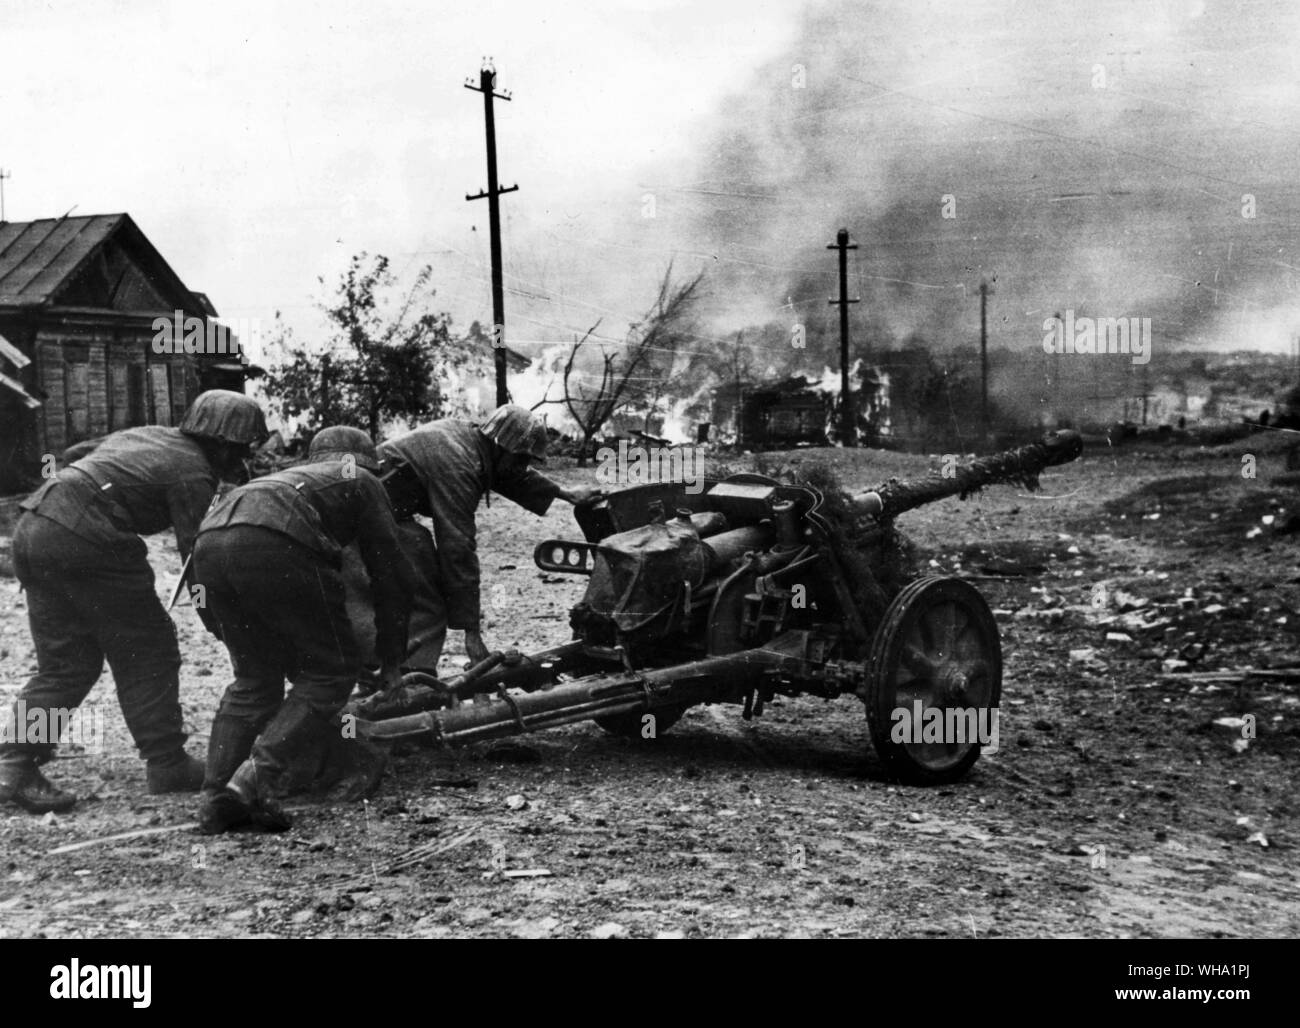 WW2: Battle for Stalingrad, Russia. In the outskirts of Stalingrad, a German anti-tank unit brings its gun into action. Stock Photo